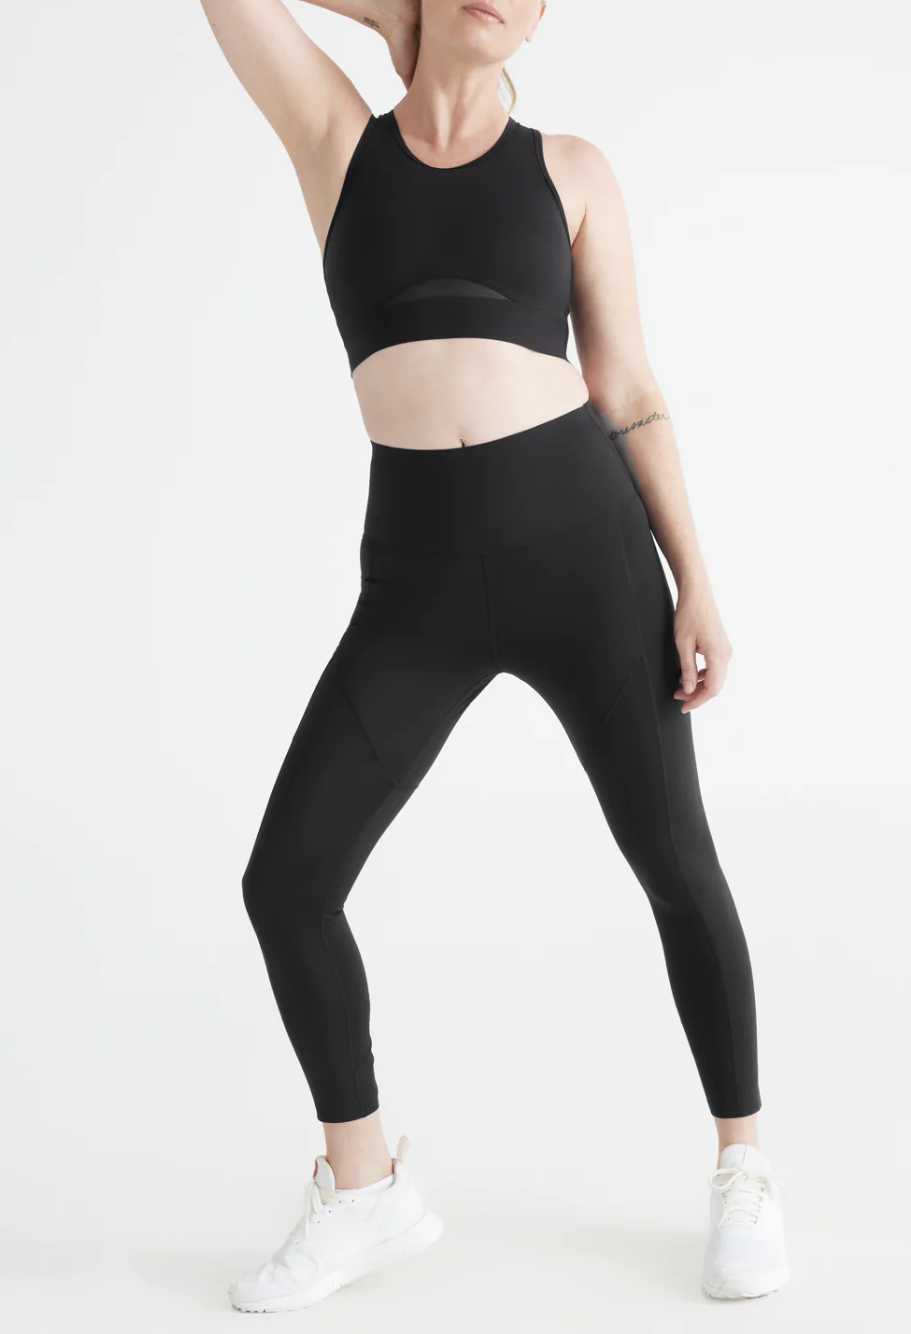 a model wearing the leggings with a sports bra in front of a plain backdrop